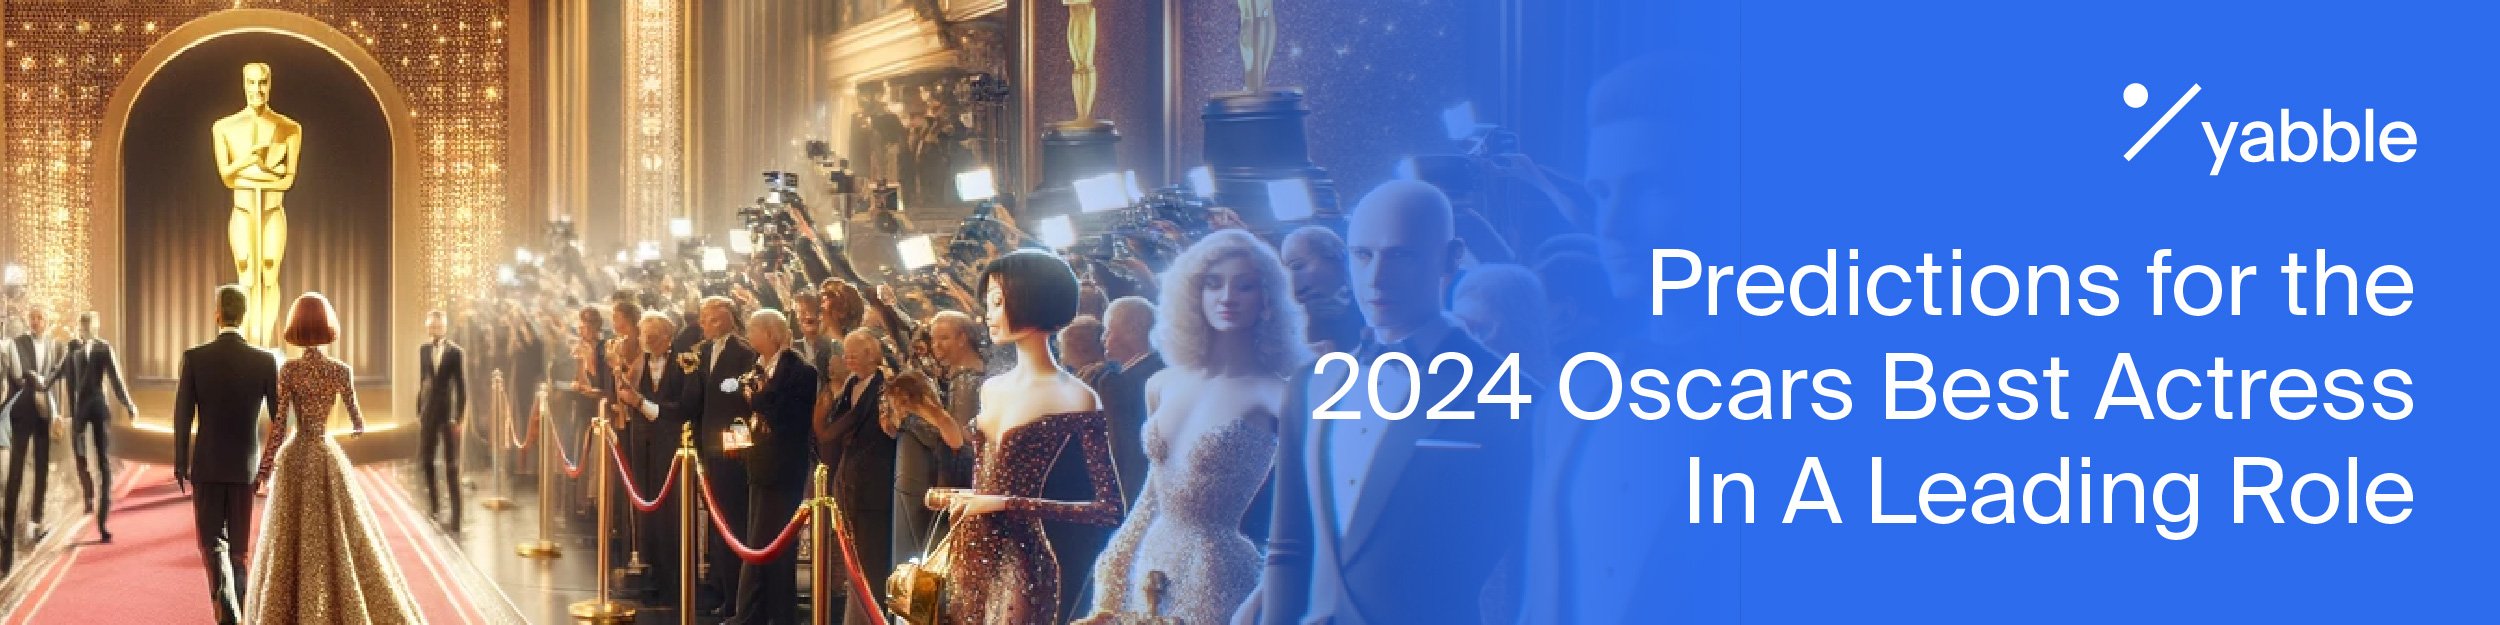 03-24 Oscars Campaign Blog Image_Yabble-Virtual-Audiences-Insights-2024-Oscars-Best-Actress-Leading-Role